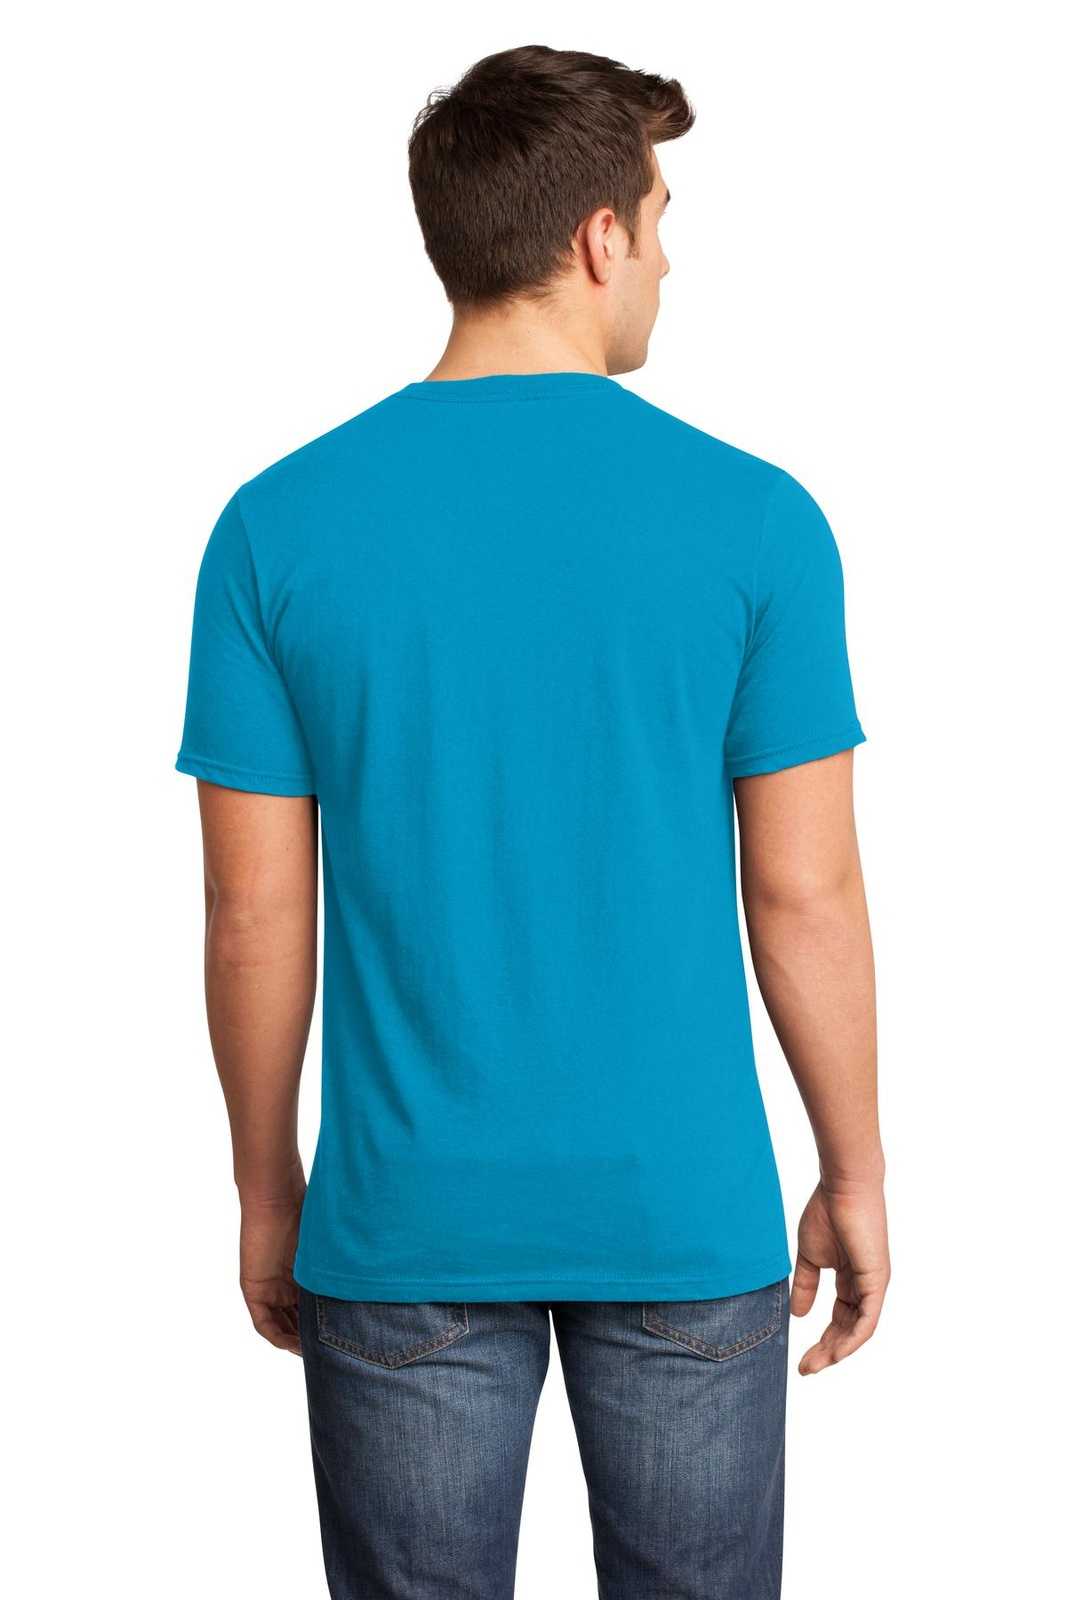 District DT6500 Very Important Tee V-Neck - Light Turquoise - HIT a Double - 1